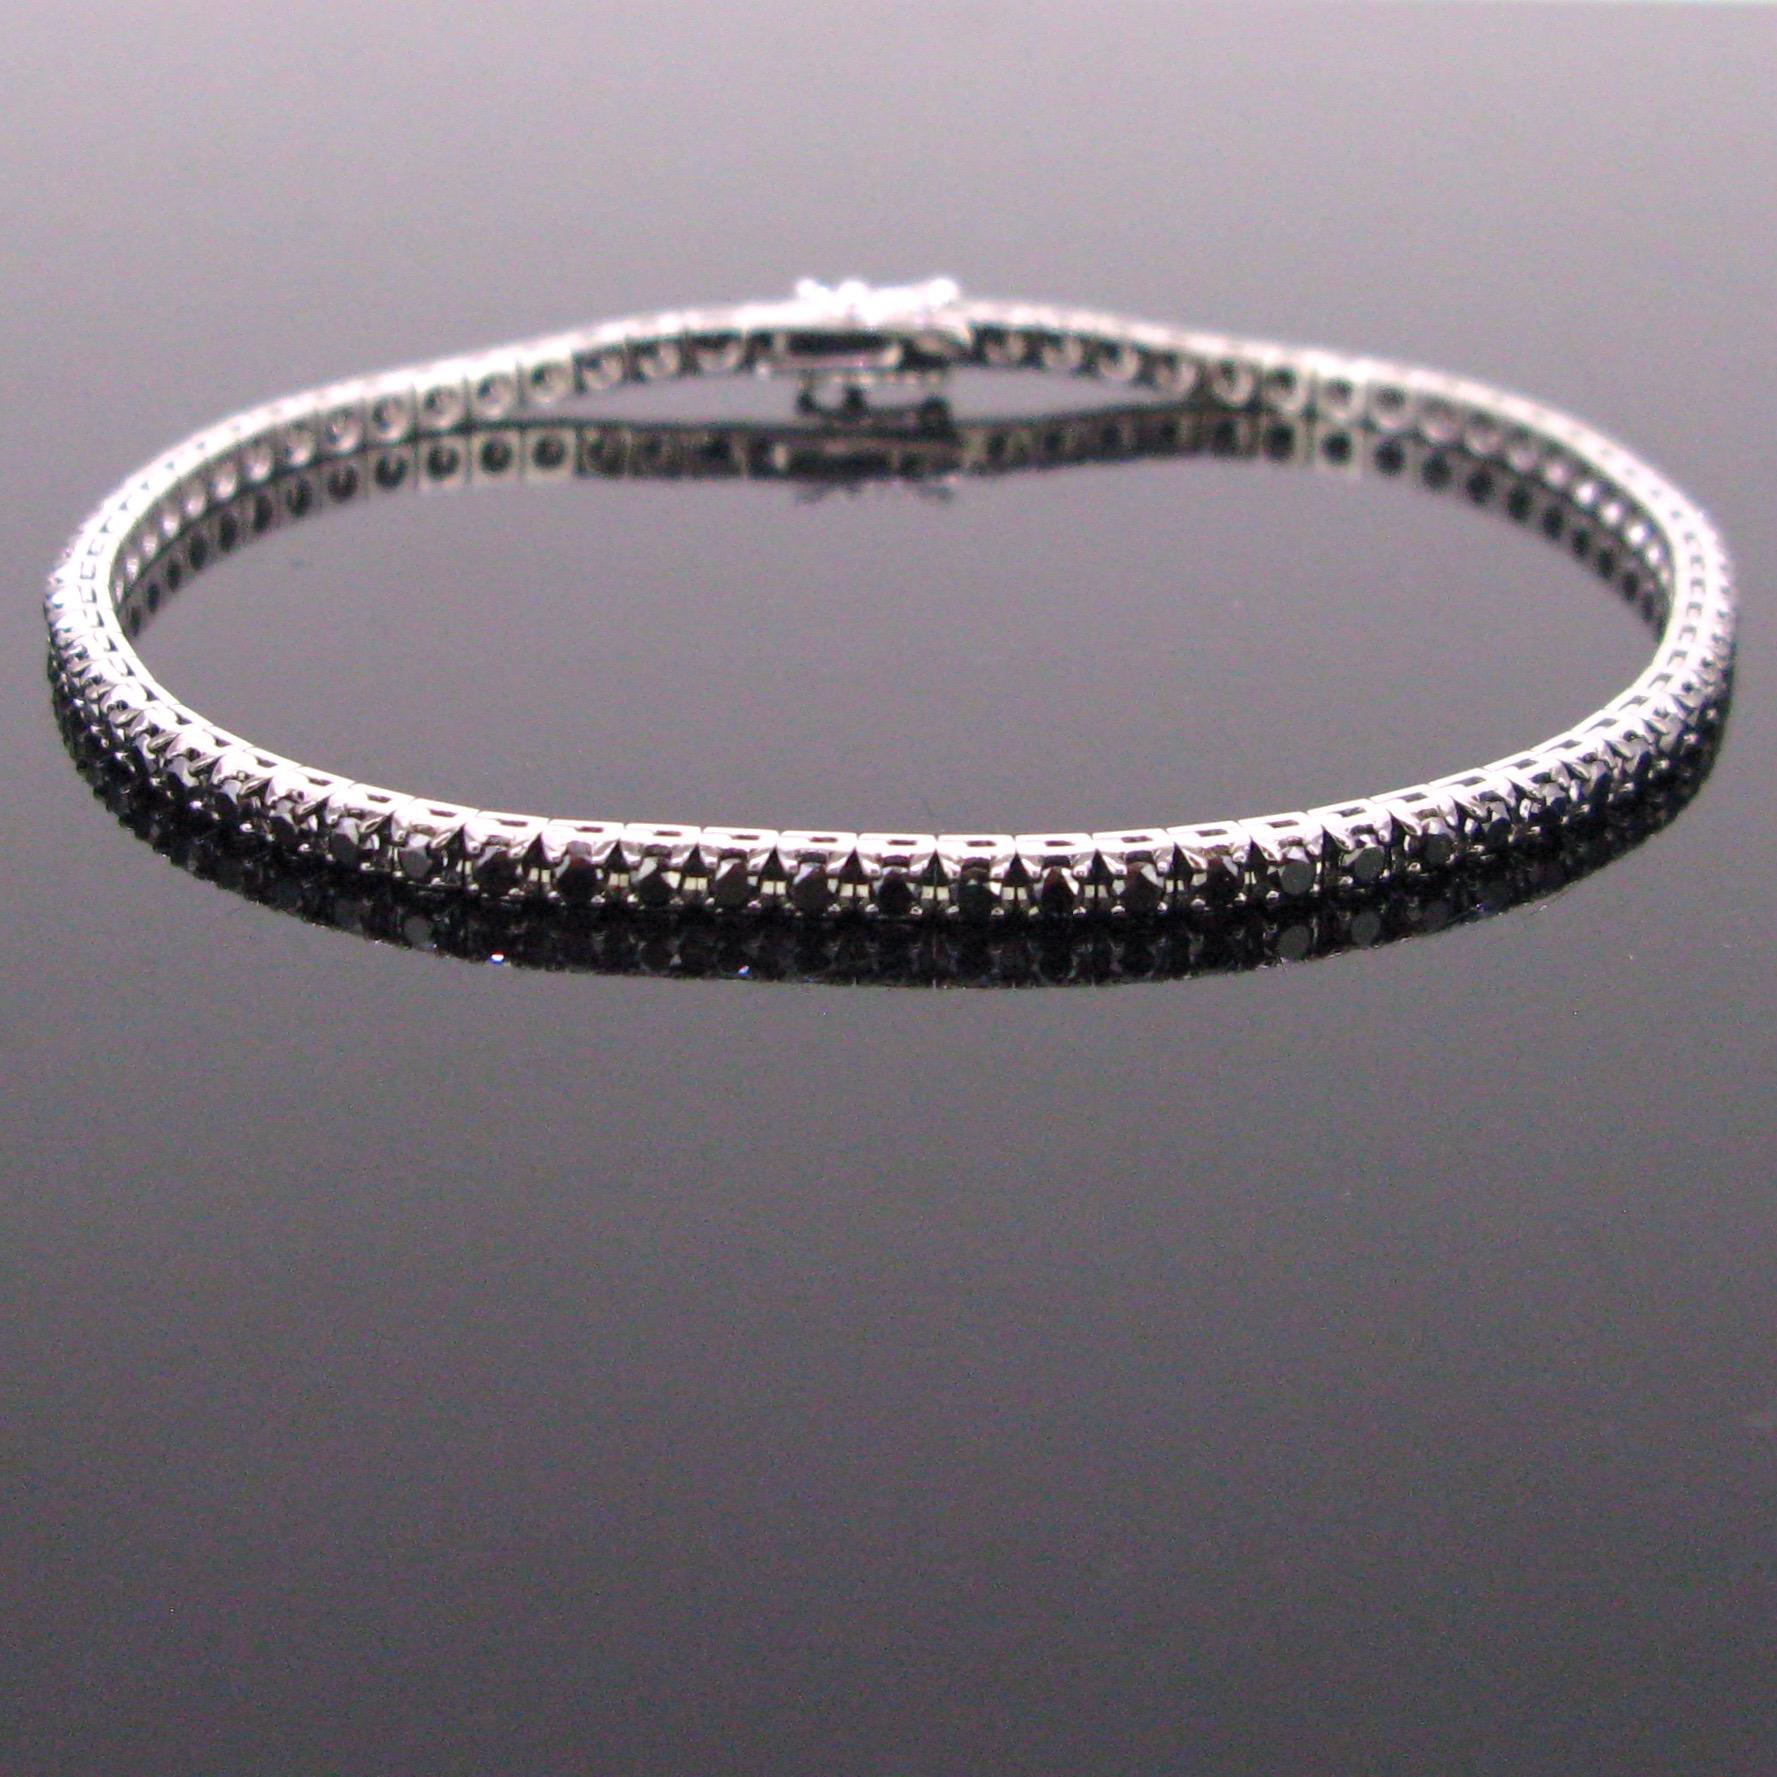 This beautiful line bracelet is made in 18kt white gold. It is adorned with 72 brilliant cut black diamonds. It is controlled wit the French eagle’s head and it is in excellent condition. This elegant tennis bracelet can be worn every day or for